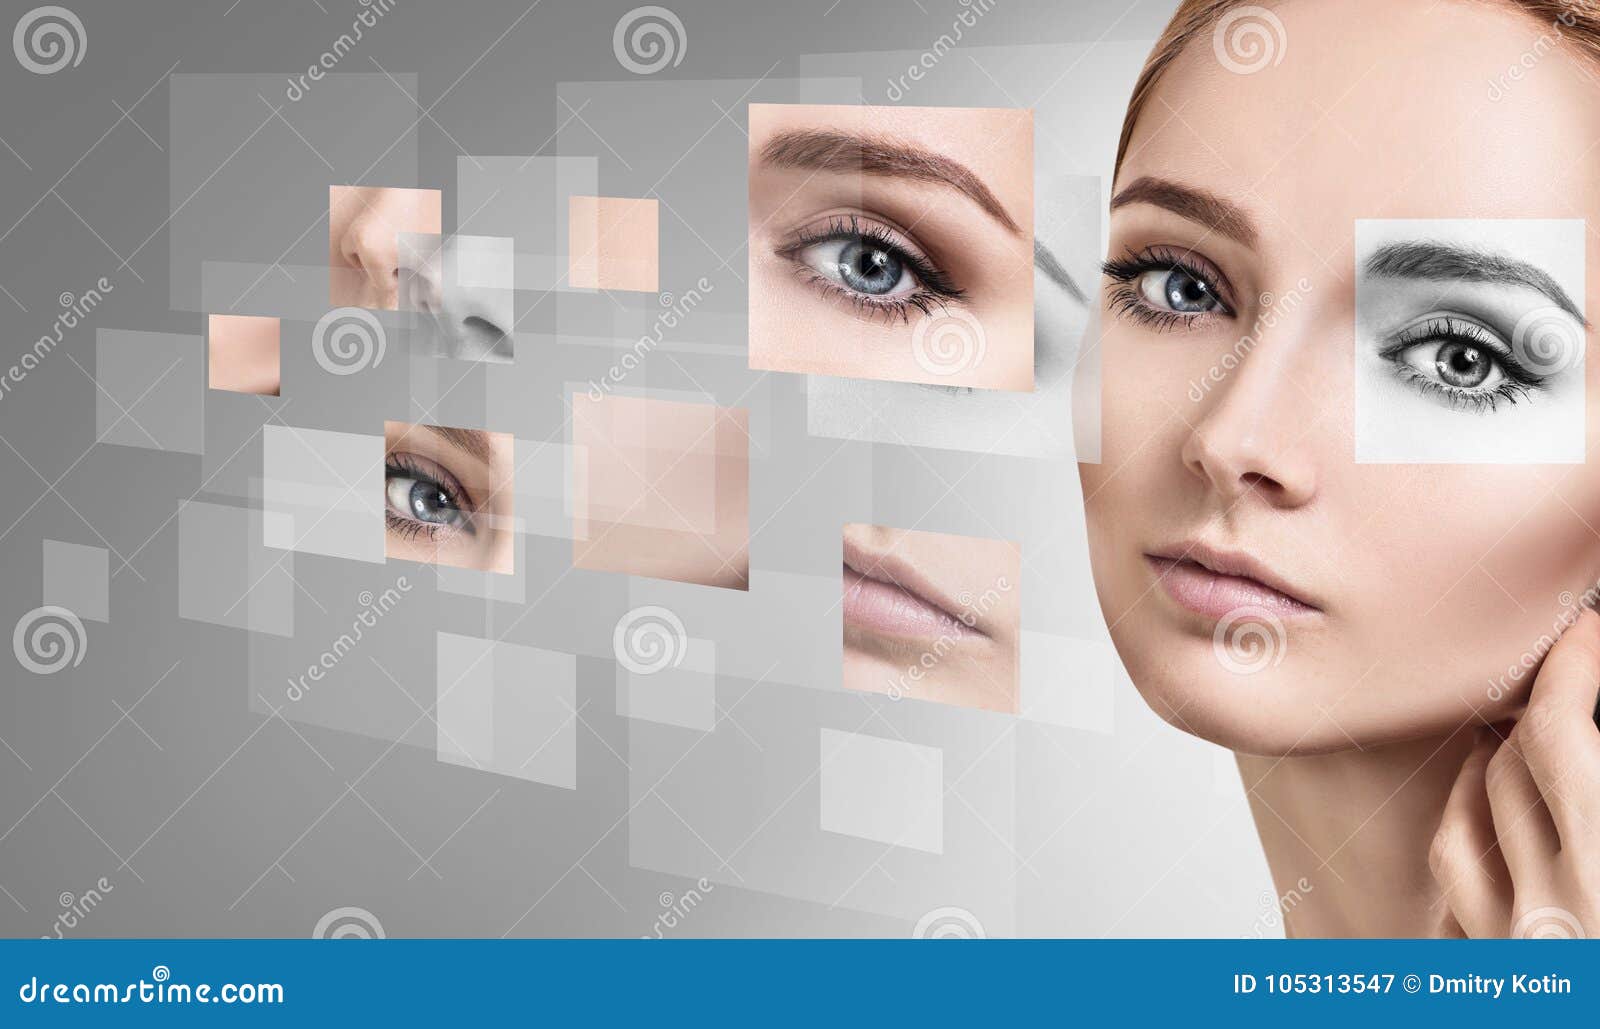 woman`s face collected from different parts.